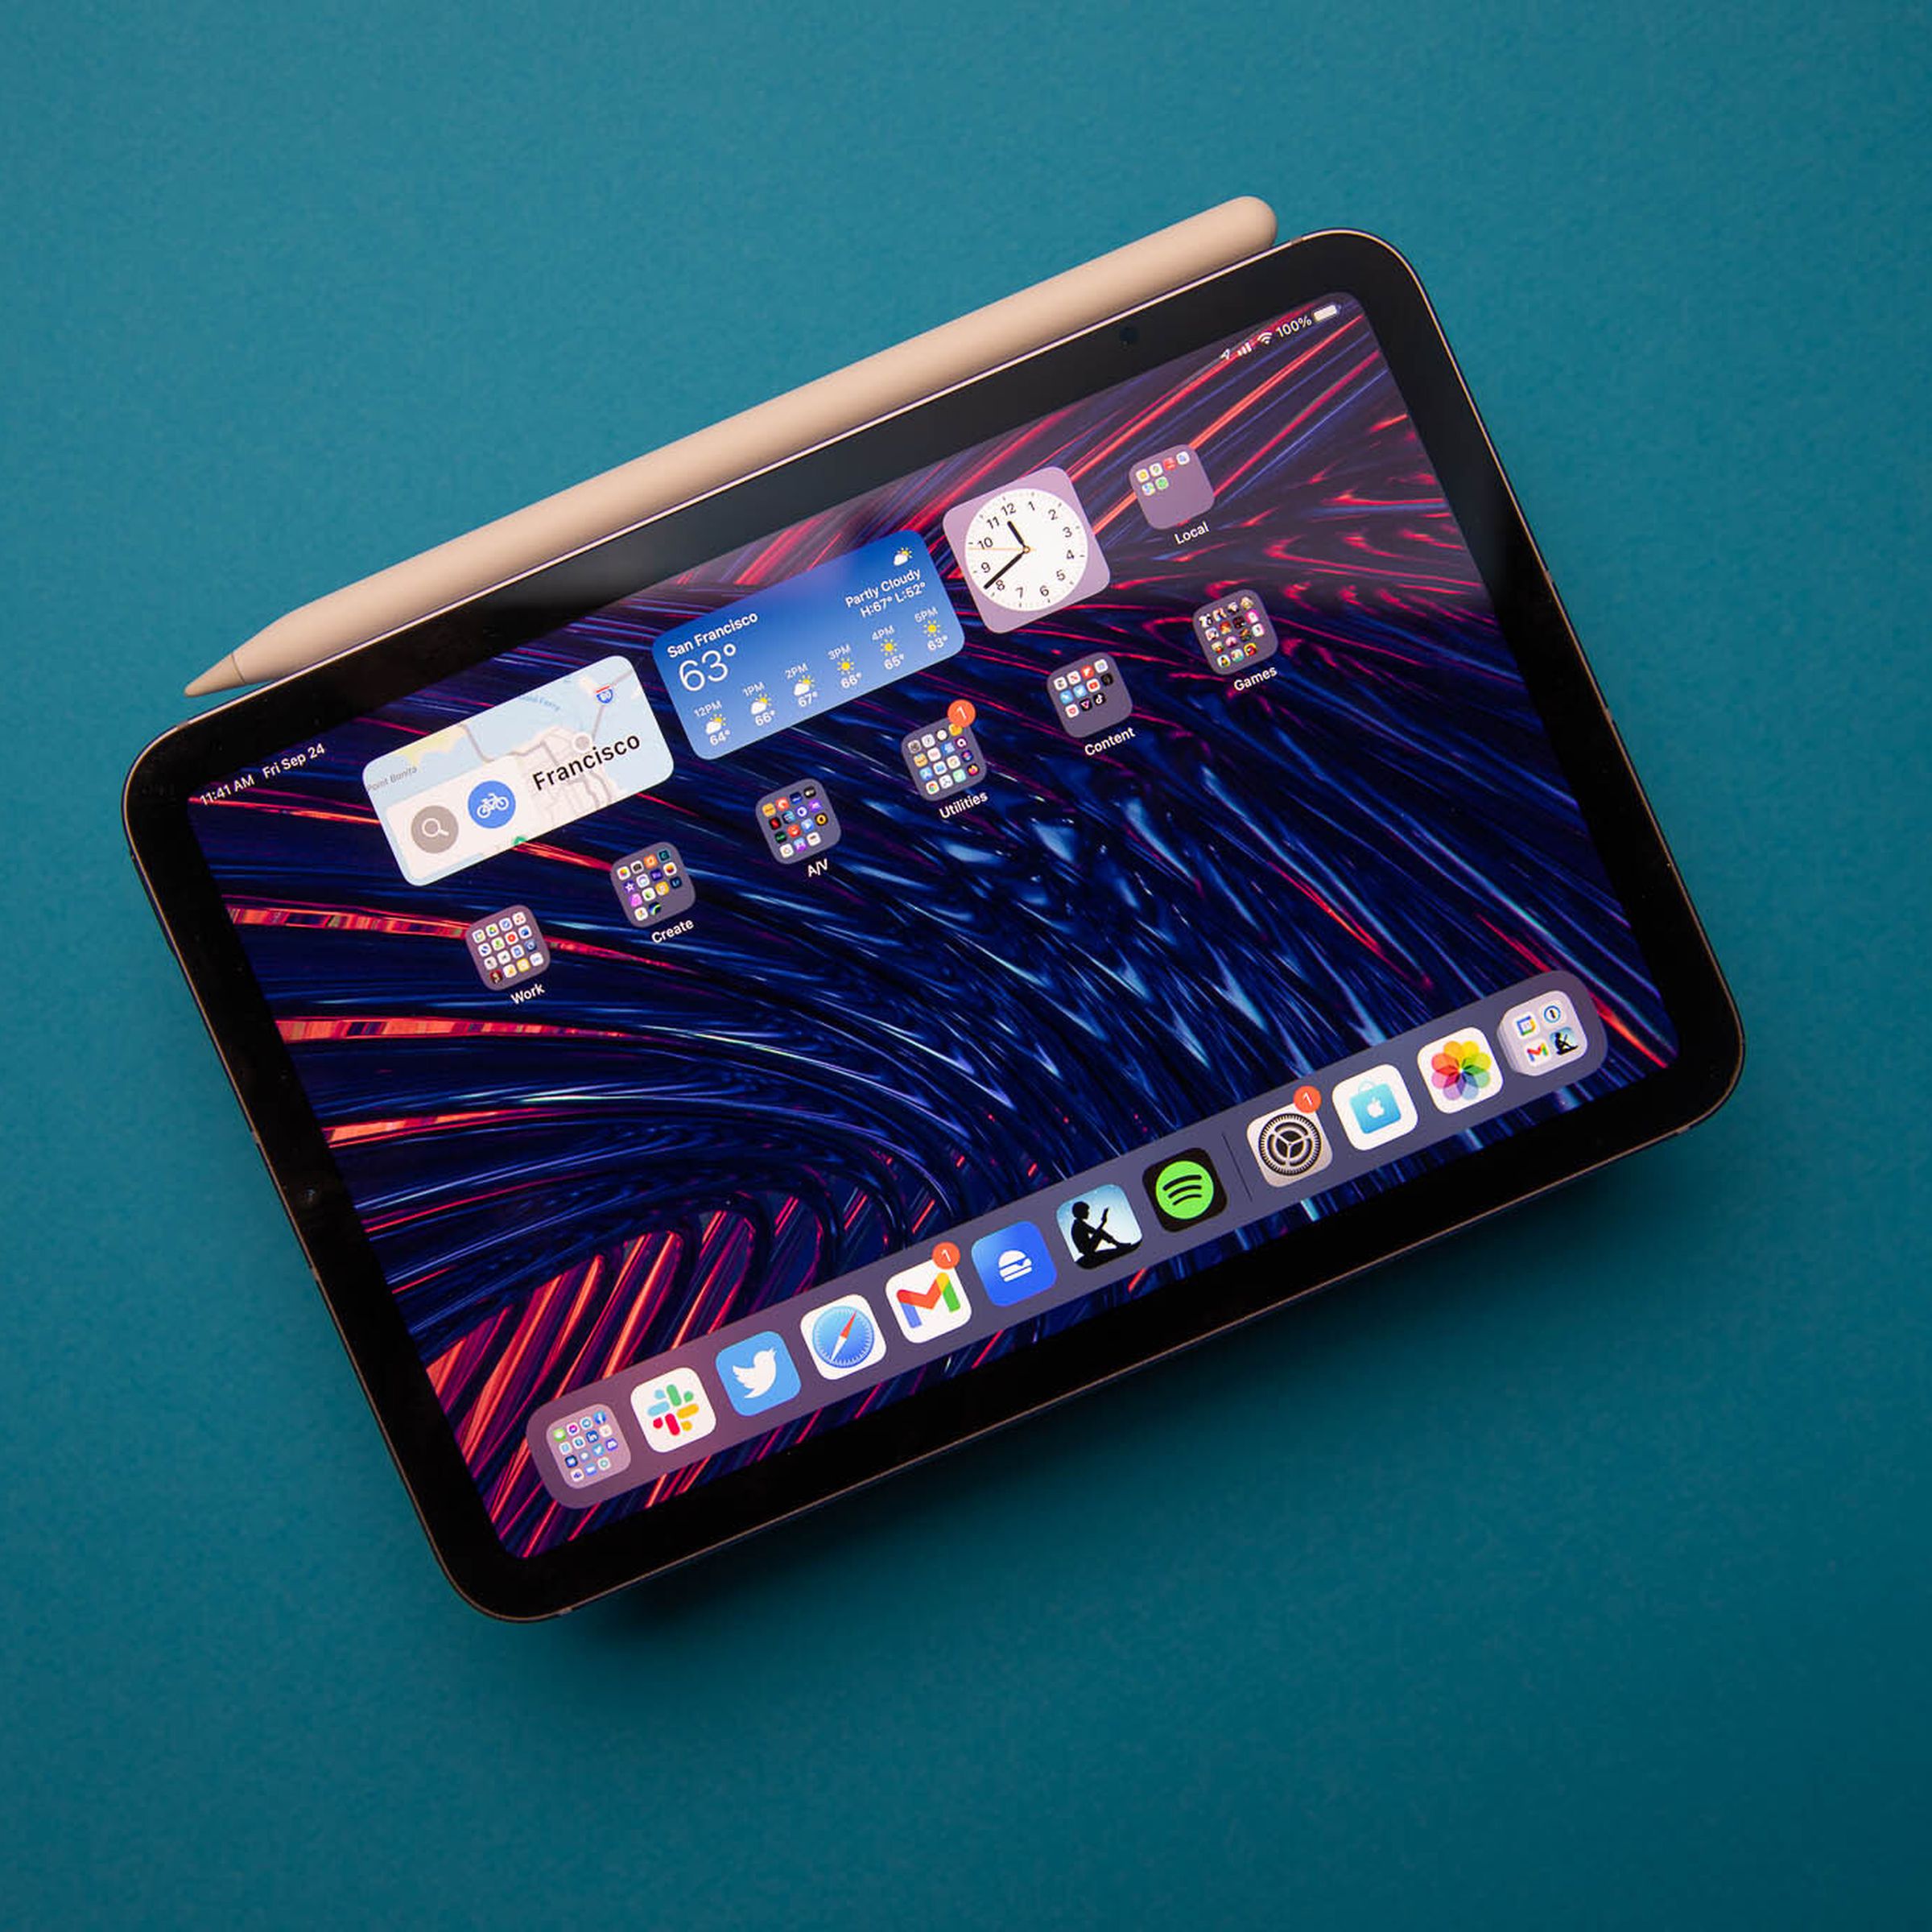 Image of the 2021 iPad mini with the included second-generation Apple Pencil on a blue background